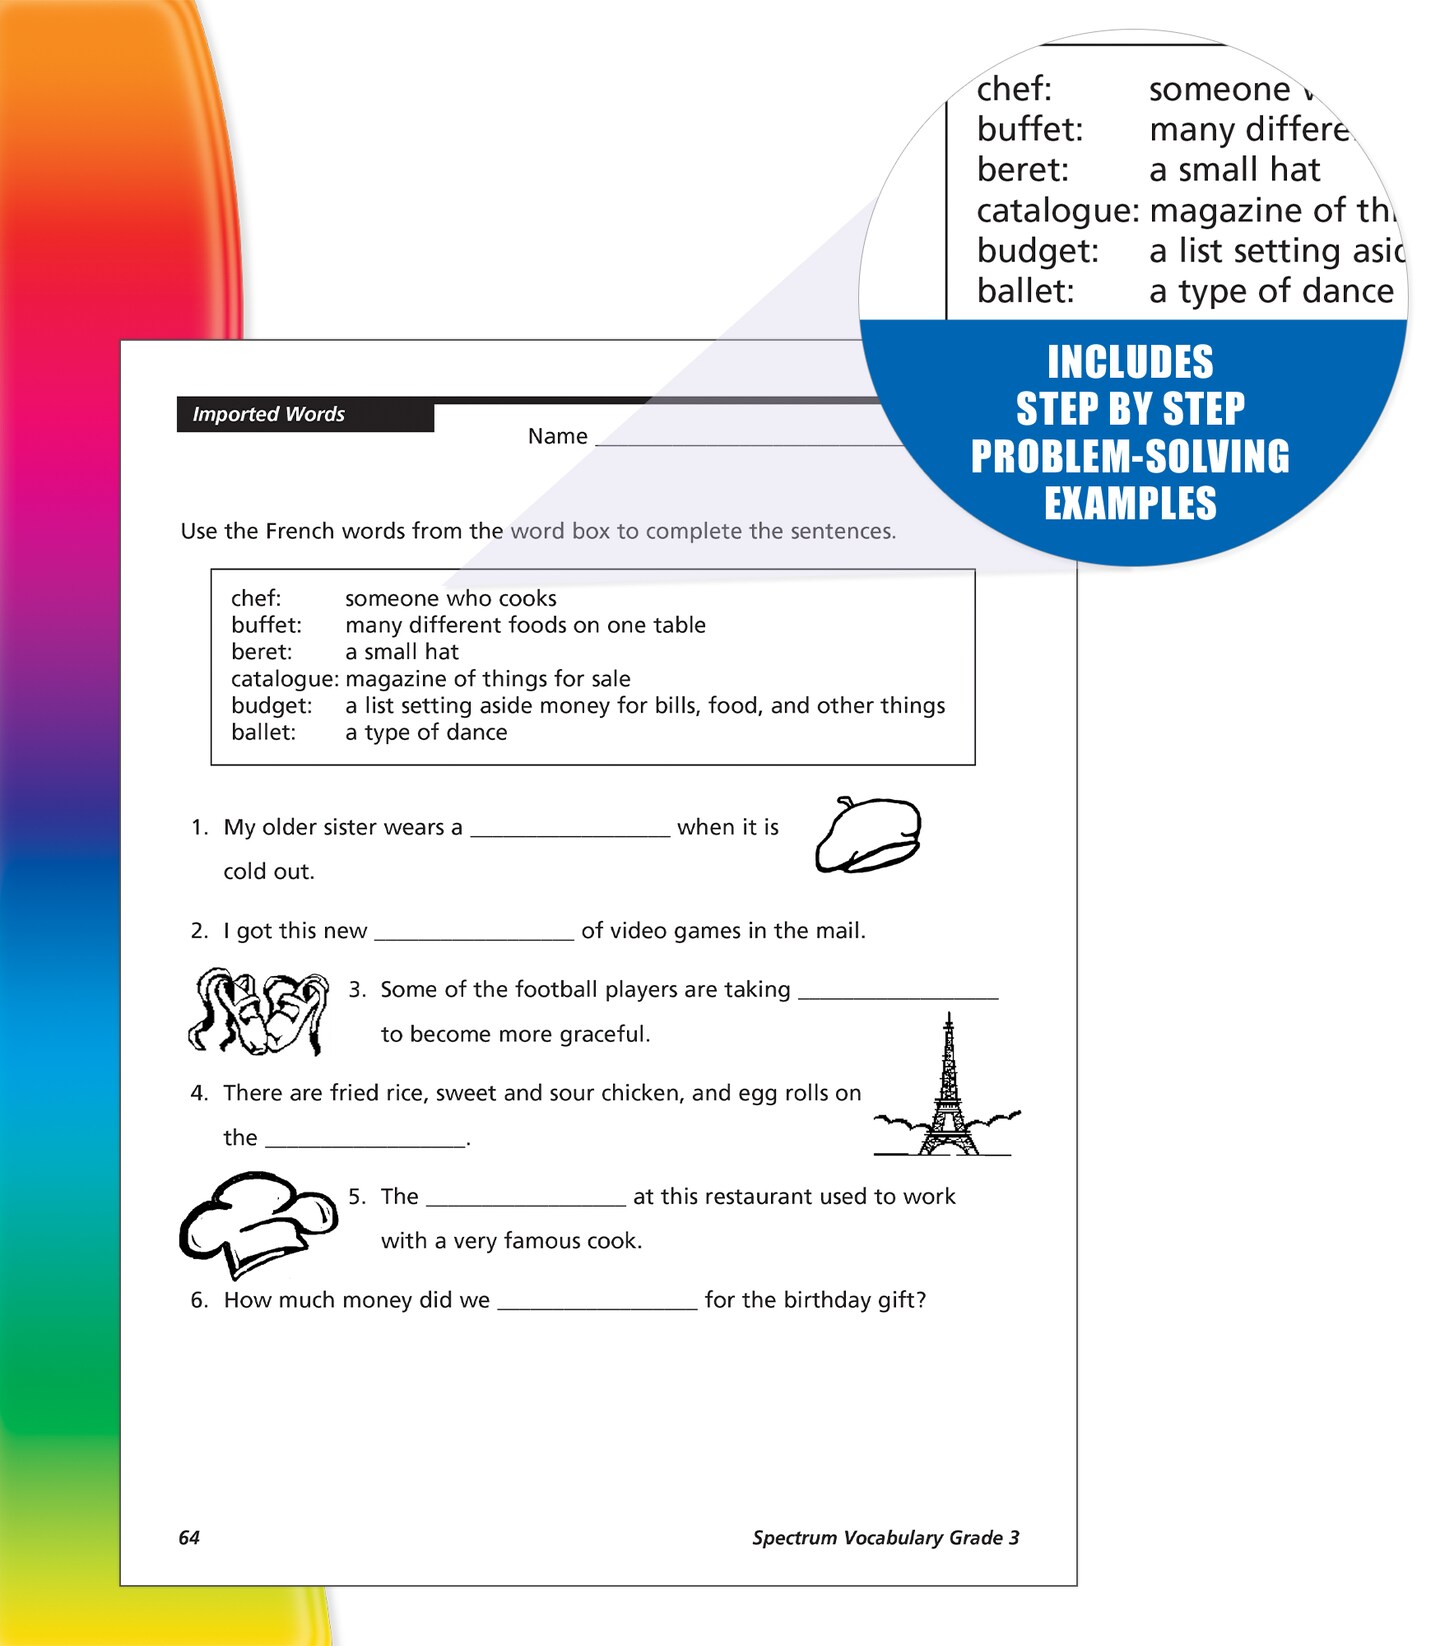 Spectrum 3rd Grade Vocabulary Workbook, Ages 8 to 9, Prefixes, Suffixes, Word Classification Vocabulary Building With Reading Comprehension and Vocabulary Test Practice, Grade 3 Vocabulary Workbook